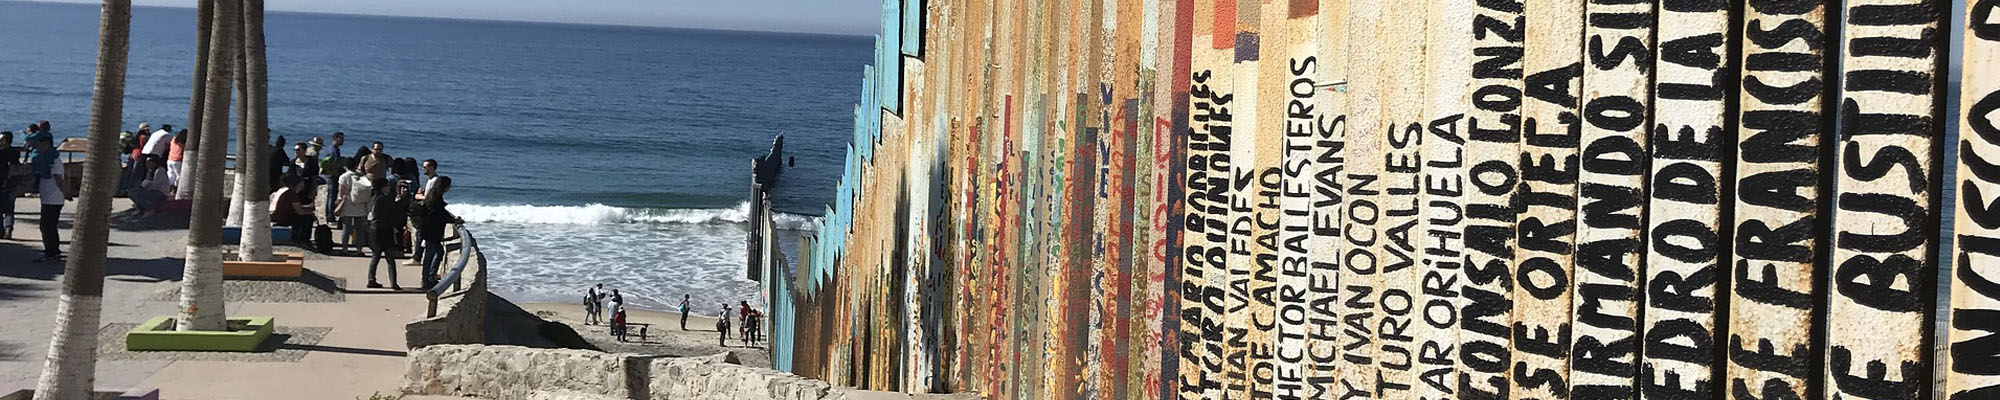 Border Fence in Imperial Beach